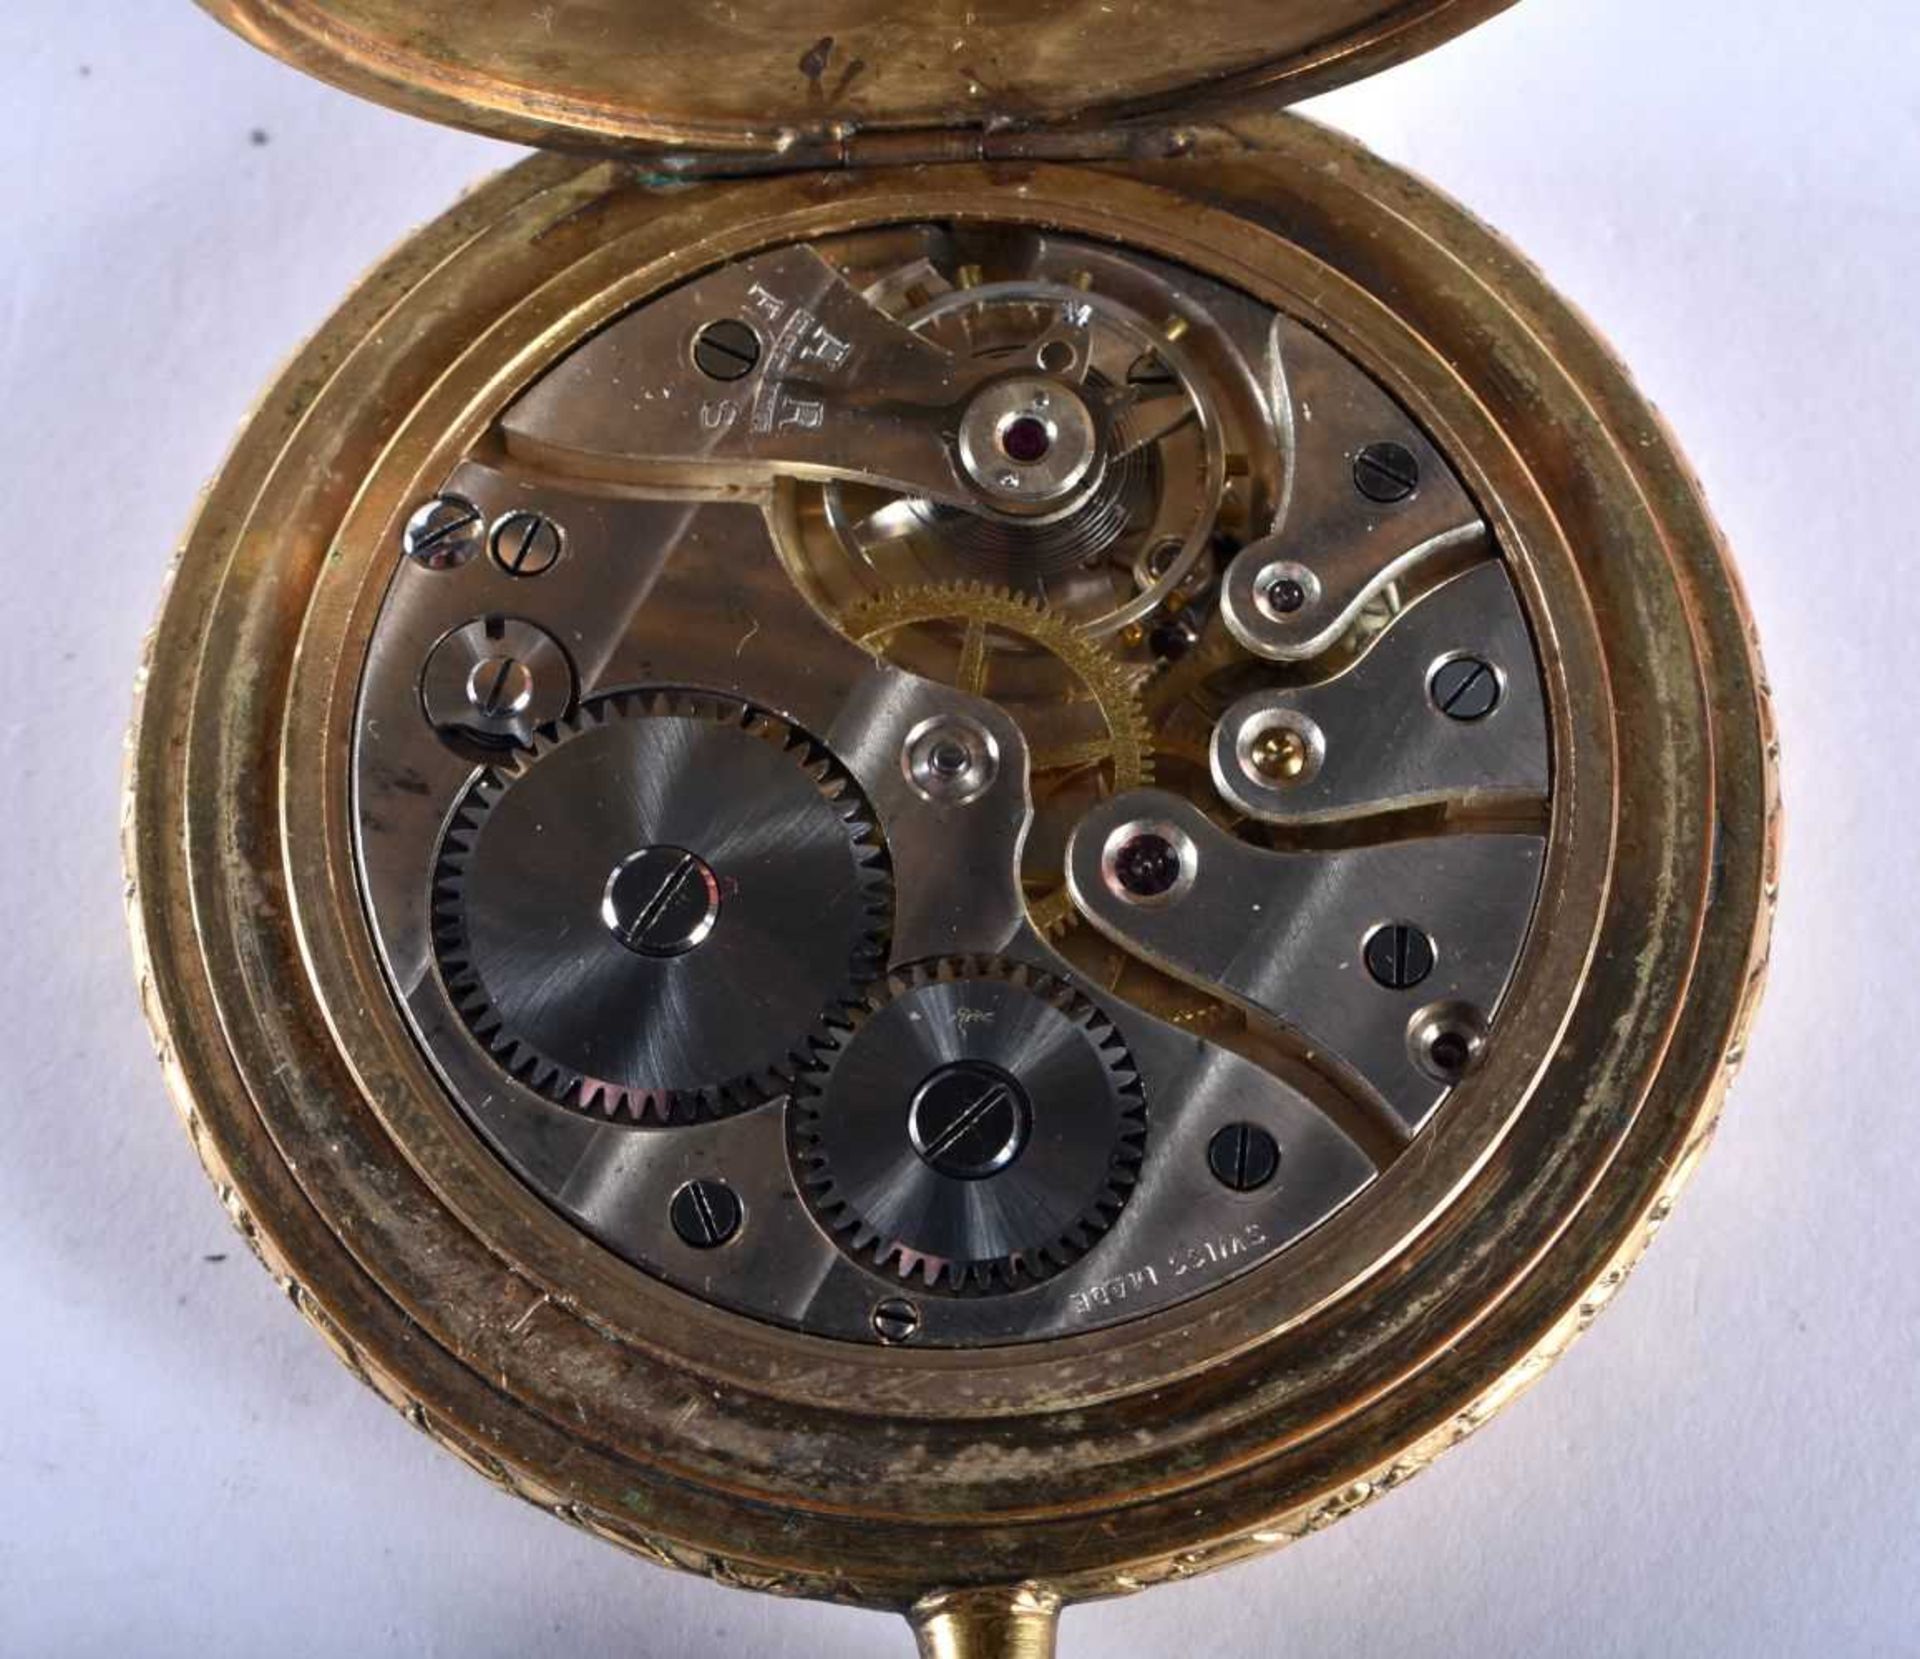 THOMAS RUSSELL Gents Rolled Gold Open Face Pocket Watch. Movement - Hand-wind. WORKING - Tested - Image 2 of 4